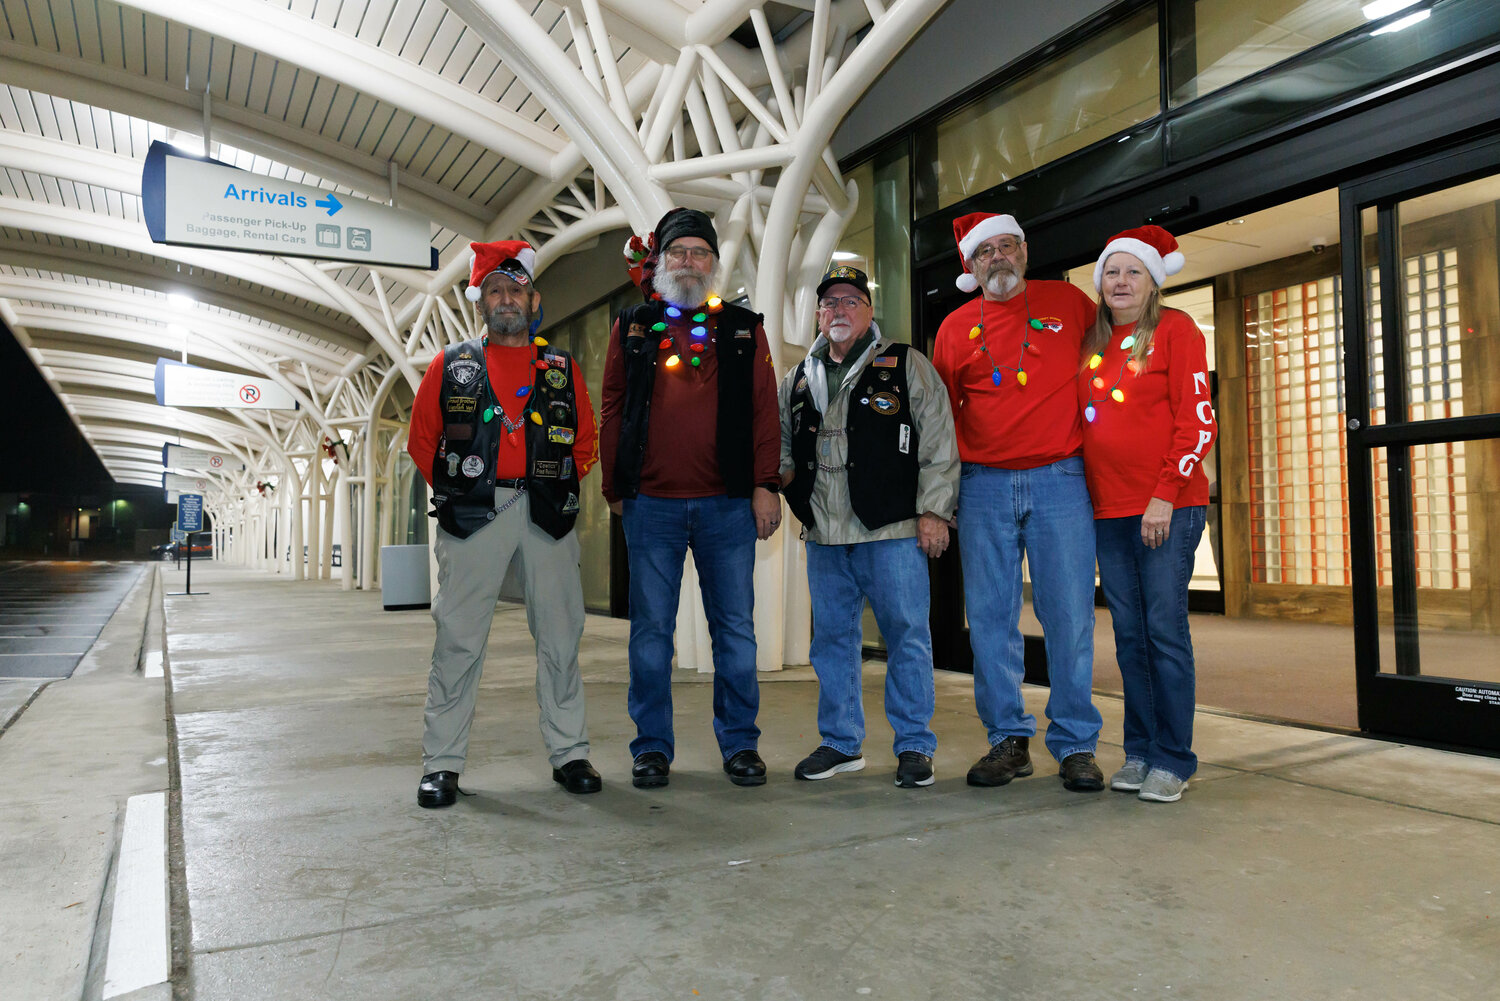 Fred Reissig, Dean Burgess, Ken Vangalder, Dan McPherson, and his wife Carolyn of the Patriot Guard Riders prepare to help families with their luggage as they arrive at the airport on Dec. 2, 2023.